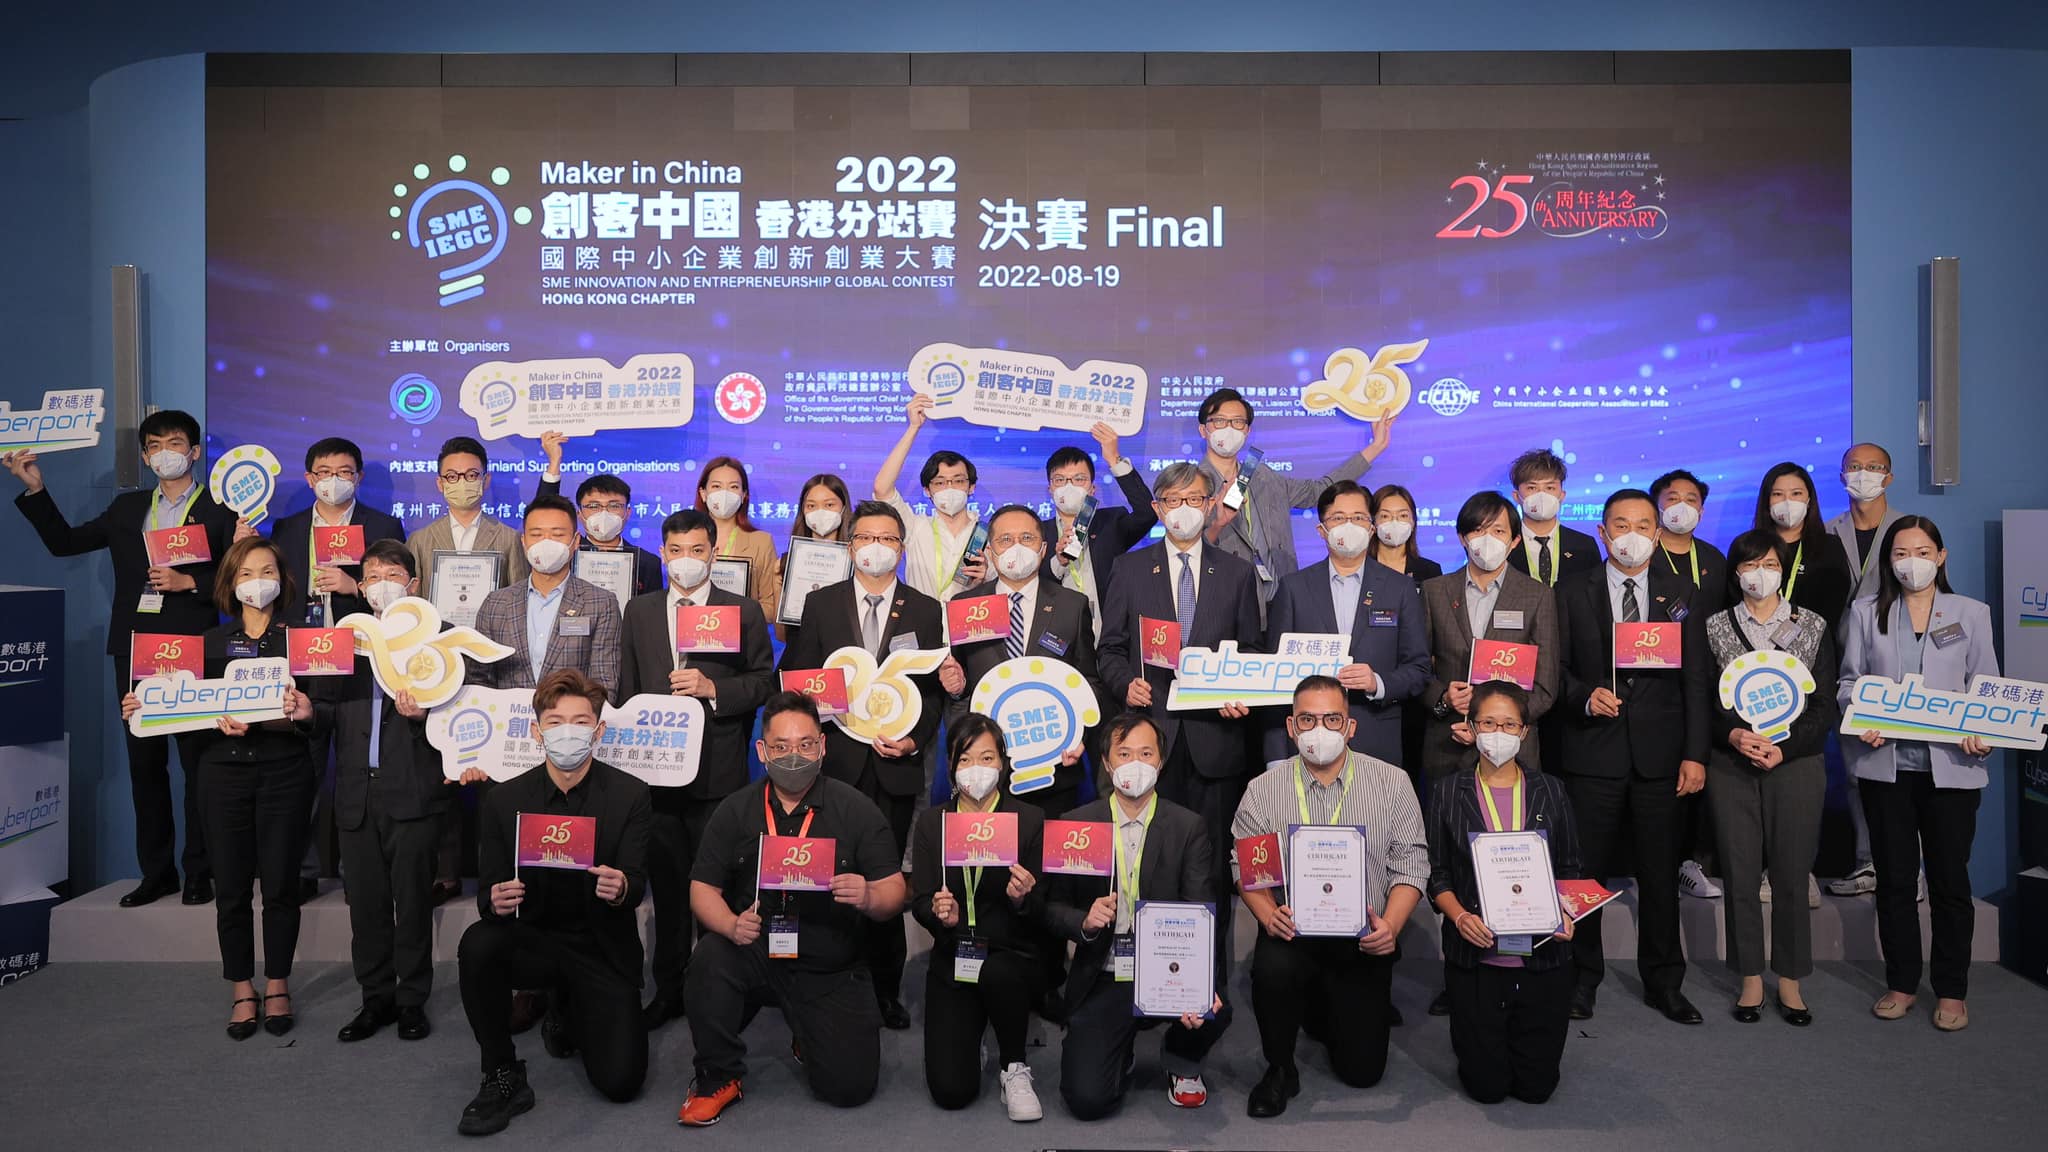 Group photo taken at the “Maker in China” SME Innovation and Entrepreneurship Global Contest 2022 – Hong Kong Chapter Final